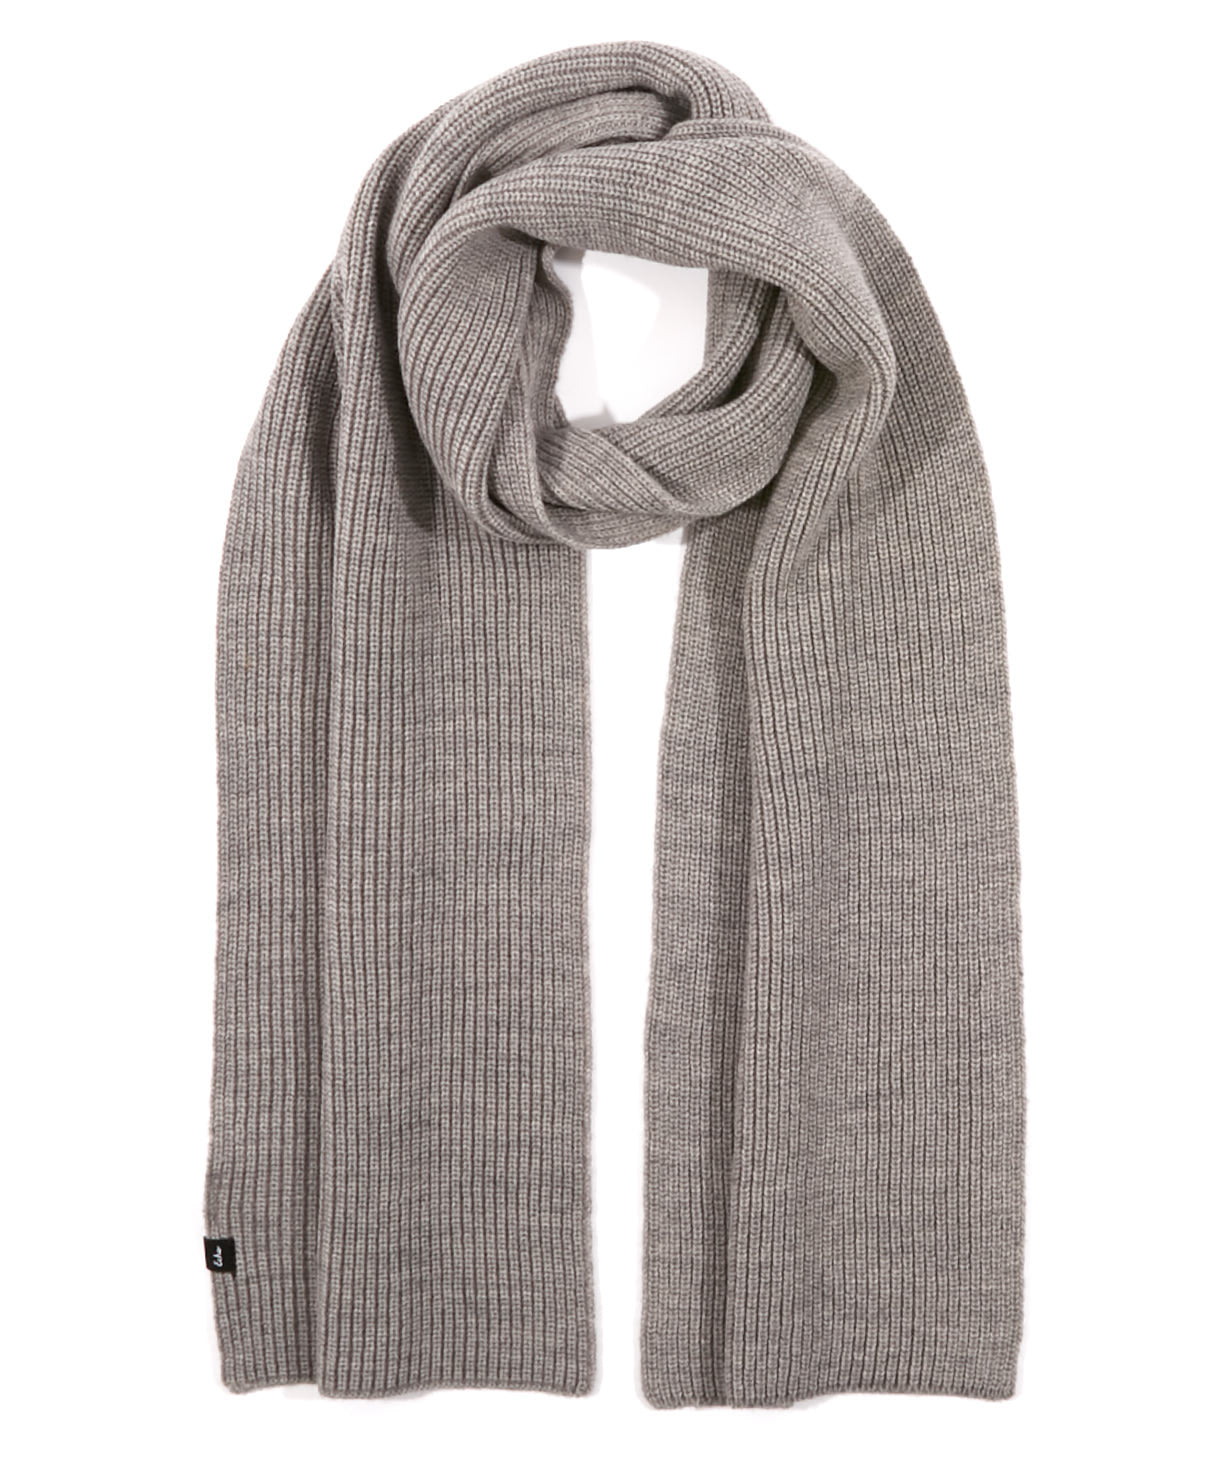 Radiant Scarf in color Heather Grey